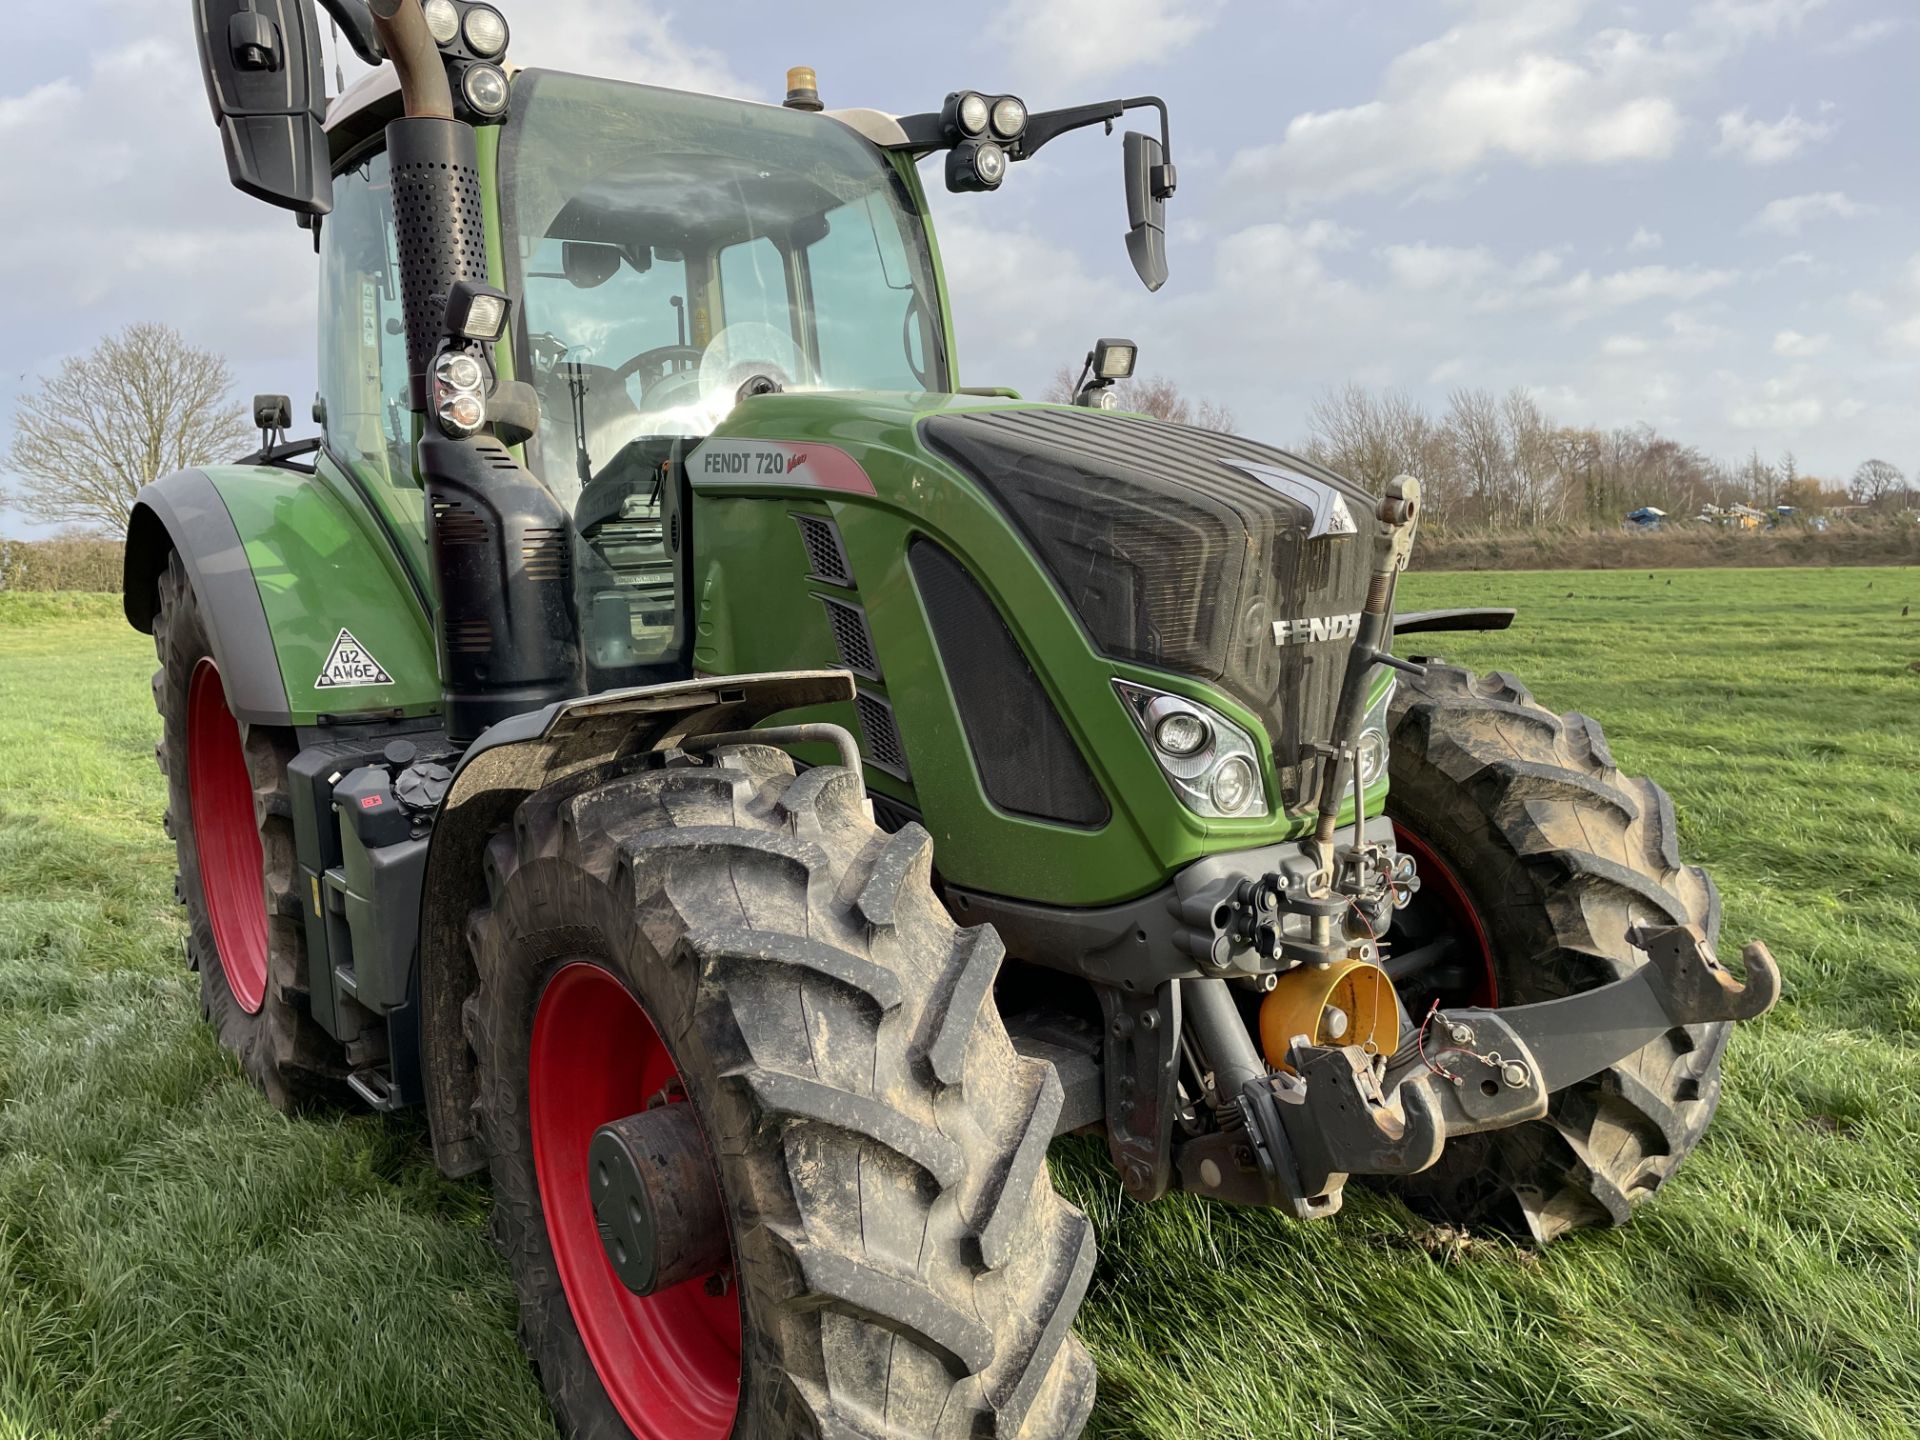 (18) Fendt 720 Vario S4 Profiplus 4wd tractor • Front linkage & PTO • Hydraulic return flow - Image 4 of 10